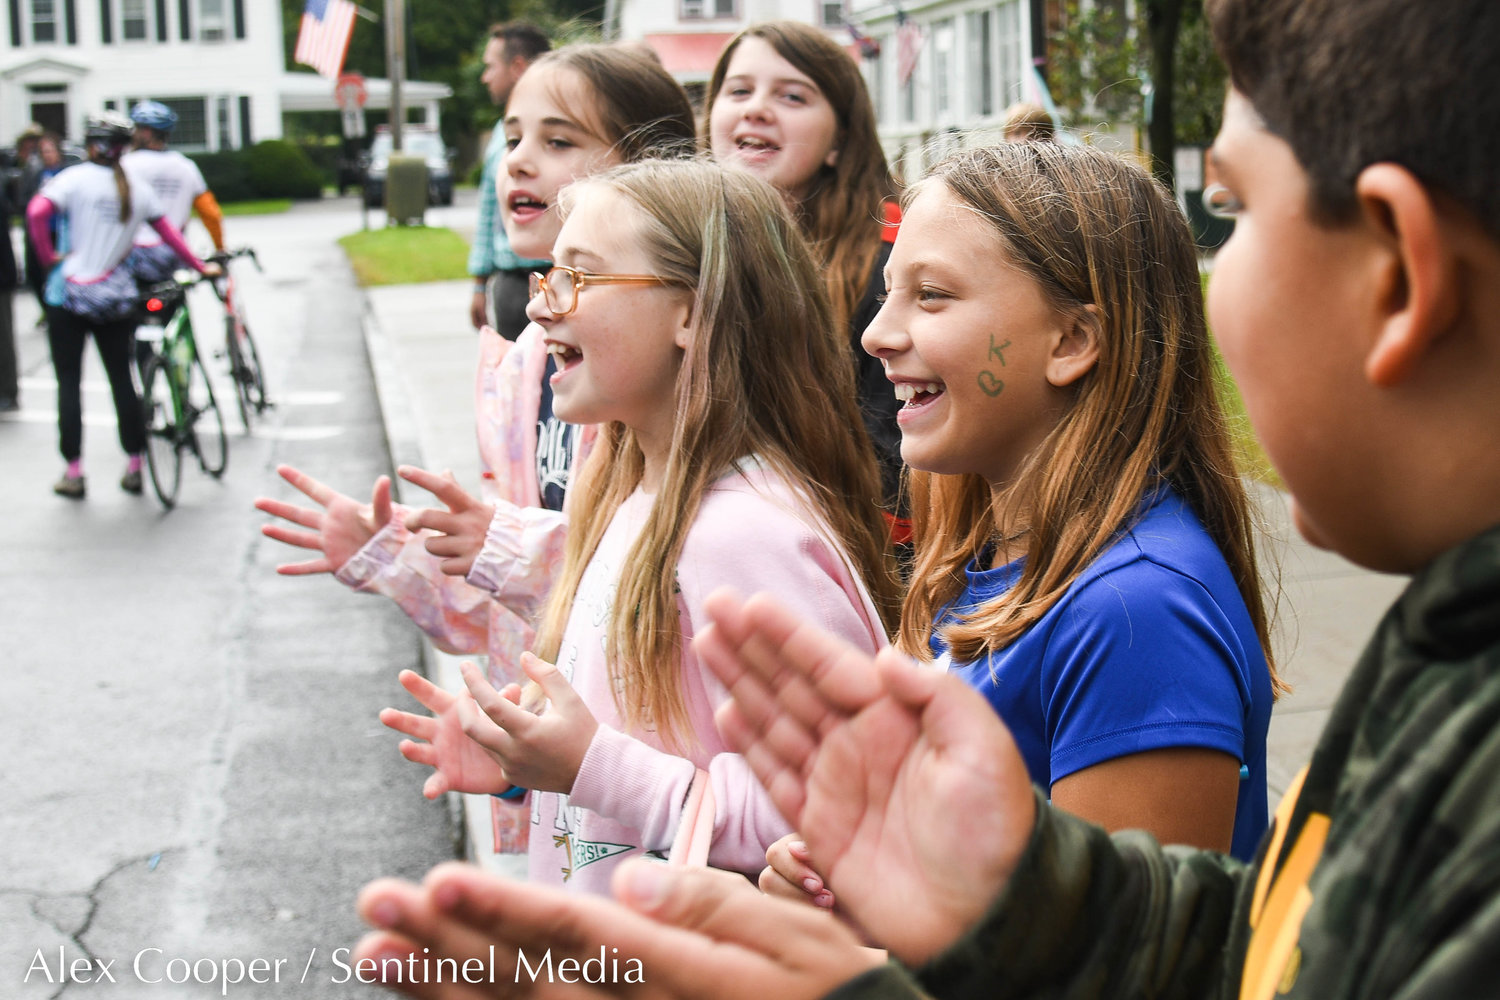 Kids clap and cheer for riders during the 24th annual Ride For Missing Children on Wednesday, Sept. 28 outside of Gregory B. Jarvis Middle School in Mohawk.